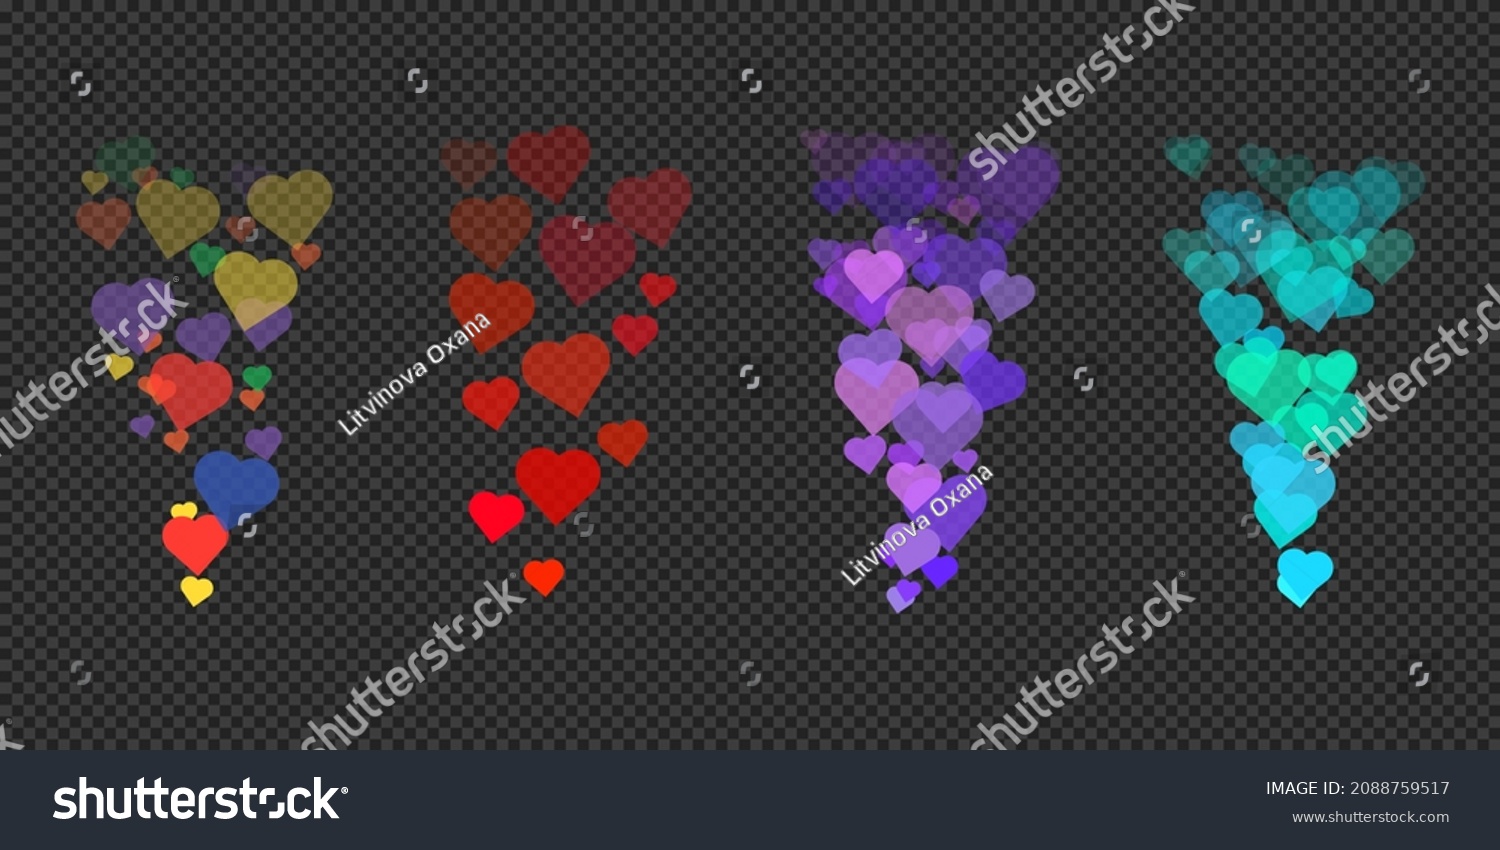 Live like stream social network reactions. Set of colorful vector flying away hearts for chat or online video feedback on transparent background. Web ui elements. Floating symbols of different size #2088759517